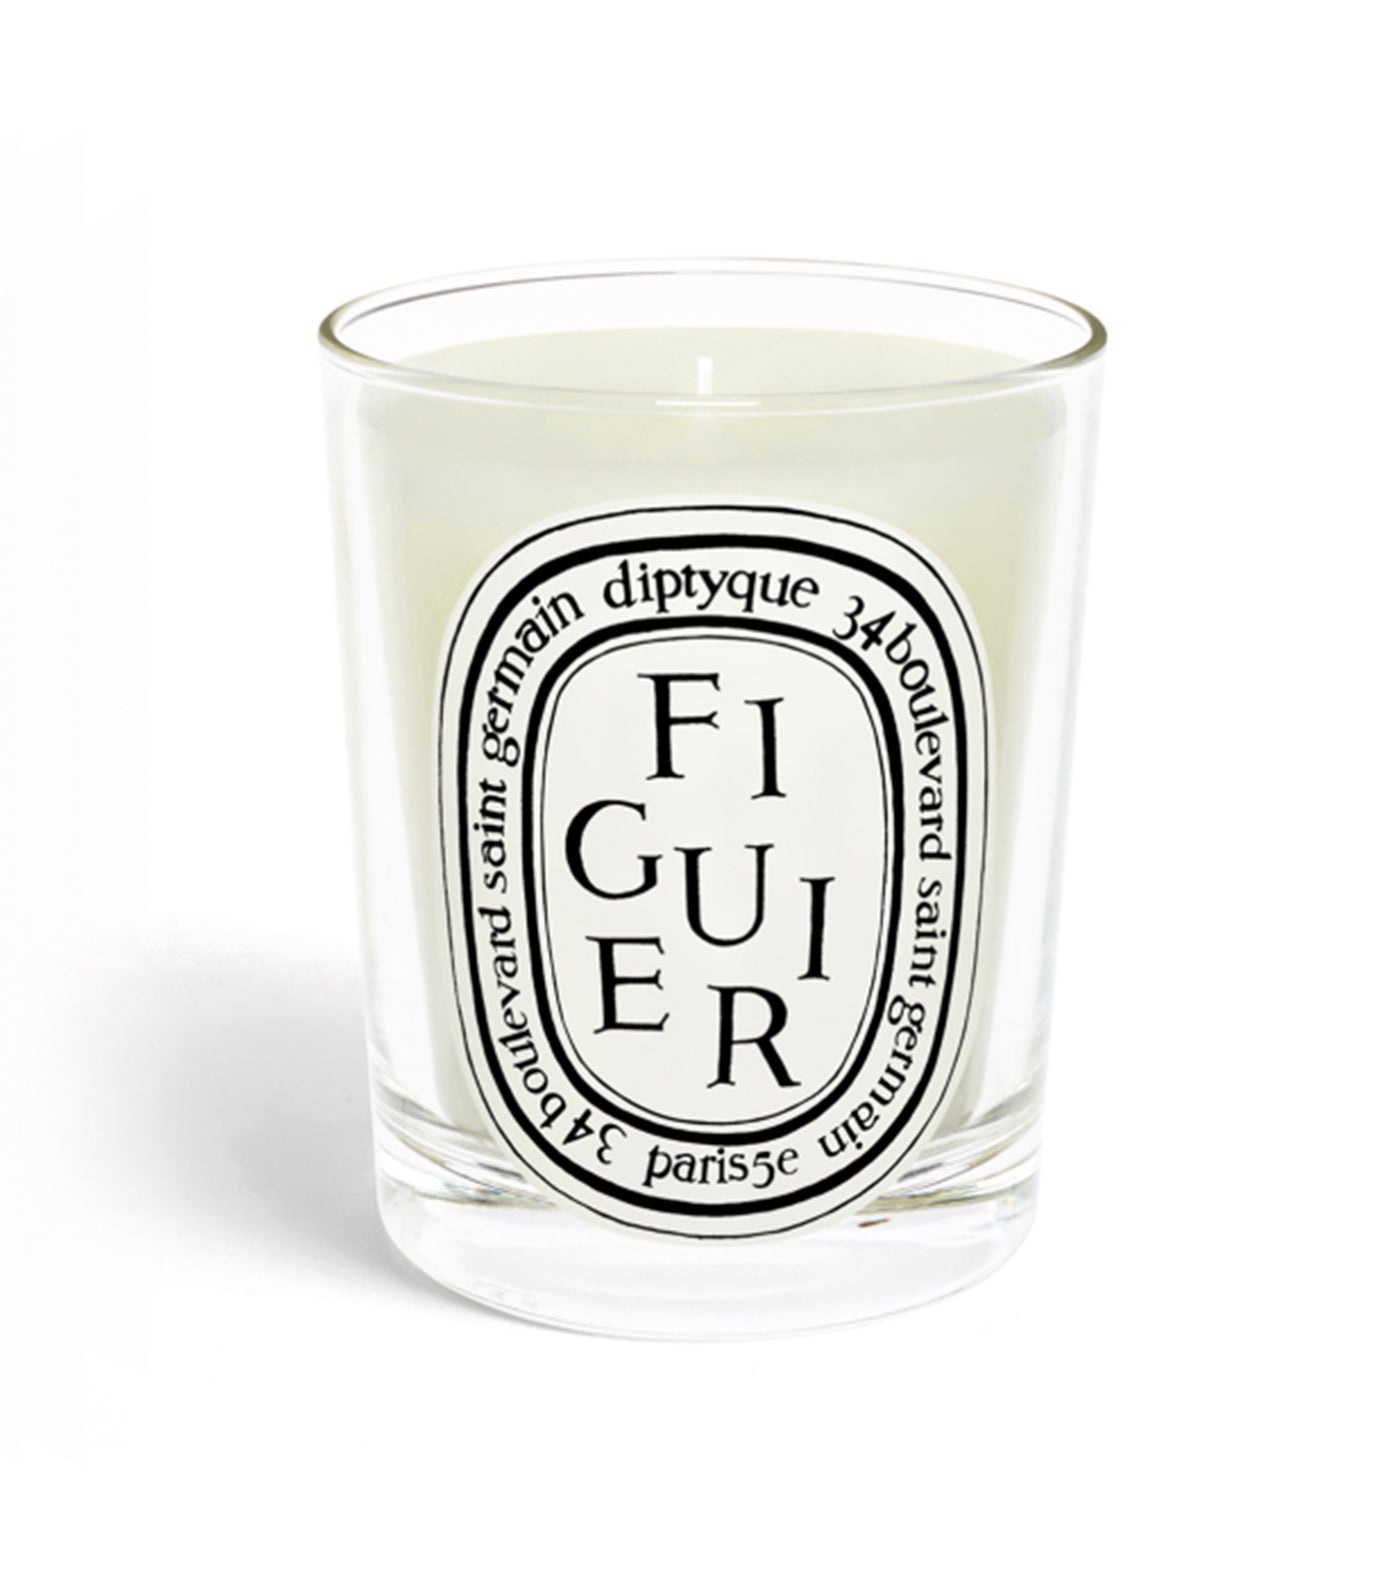 diptyque figuier / fig tree candle